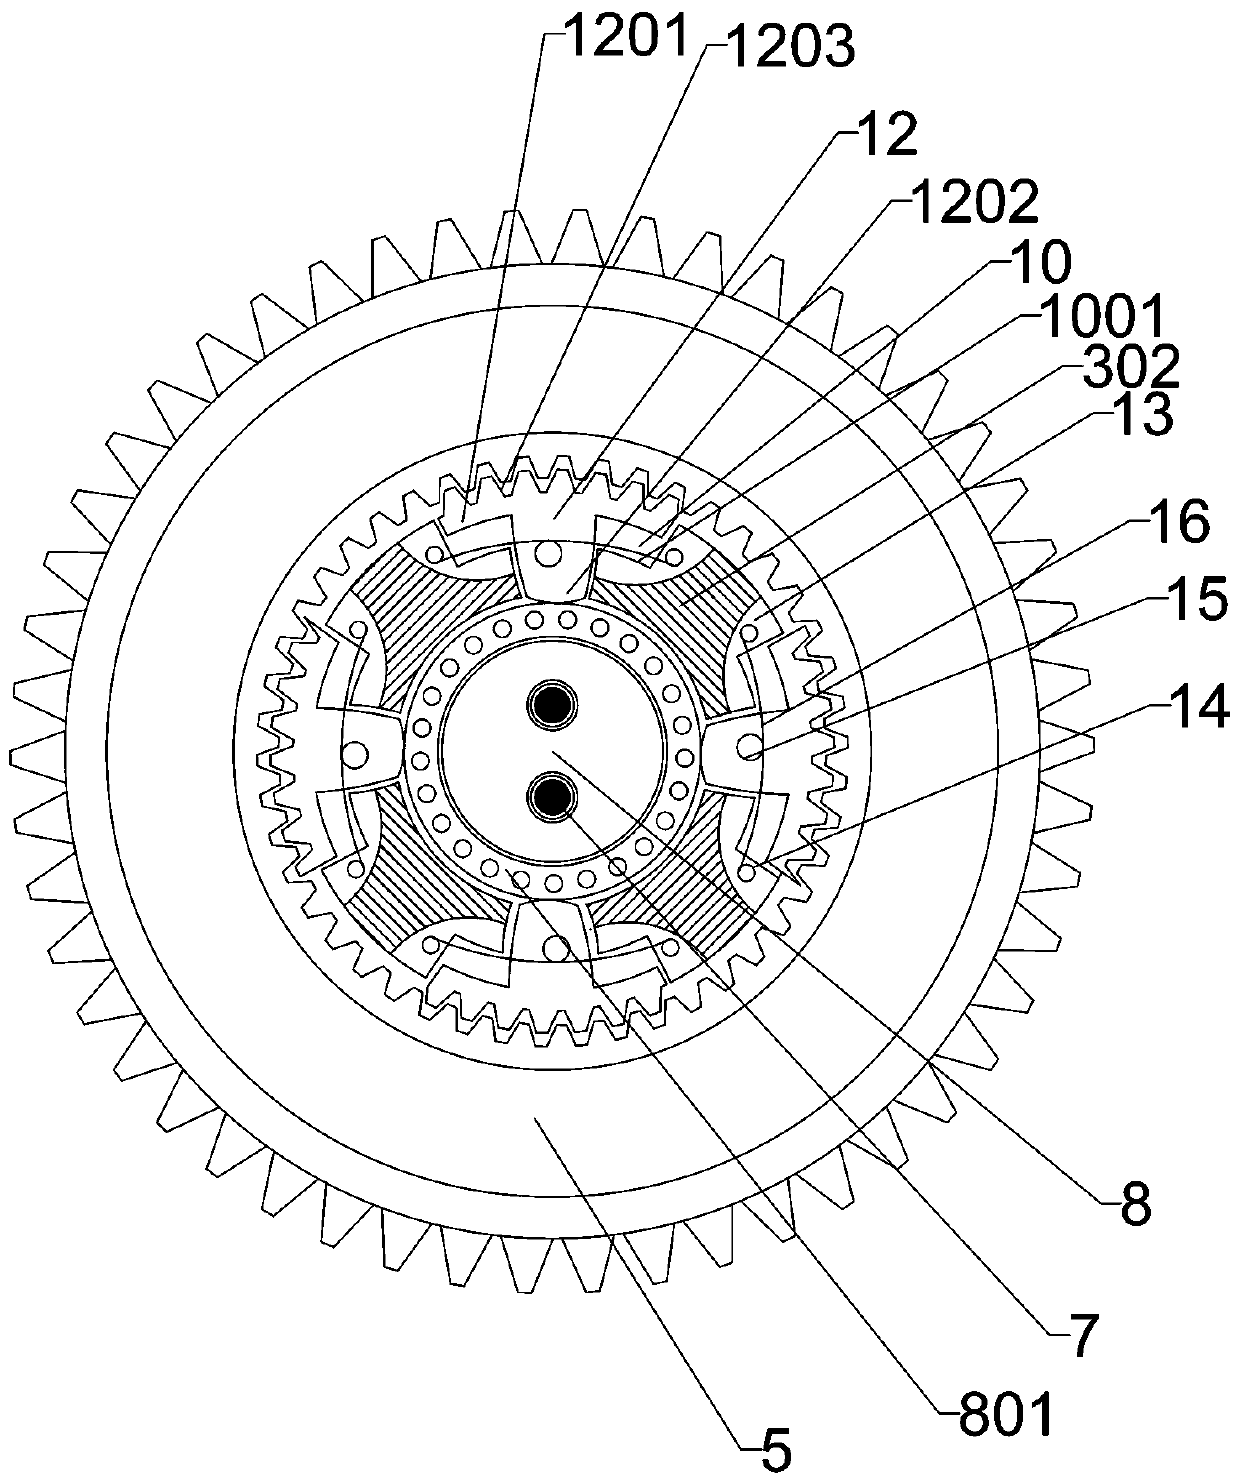 Gearbox with internal support gear shifting mechanism